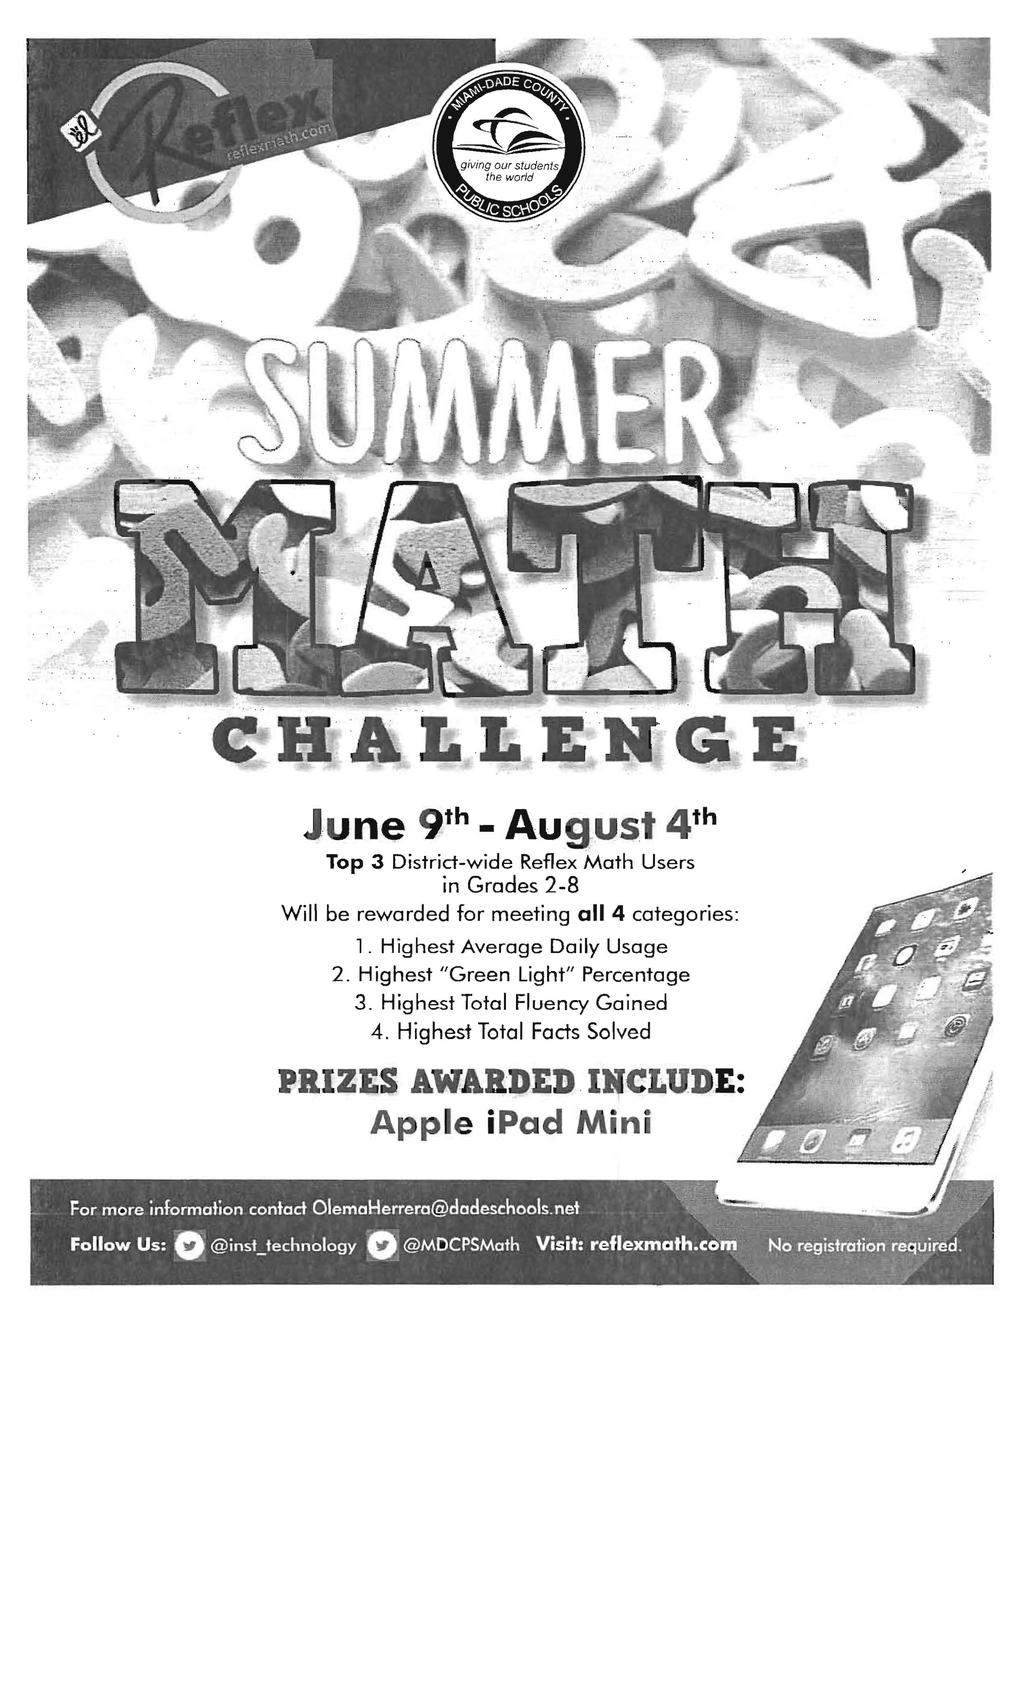 June 9 th - AU9:USt 4 th Top 3 District-wide Reflex Math Users in Grades 2-8 Will be rewarded for meeting all 4 categories: 1.